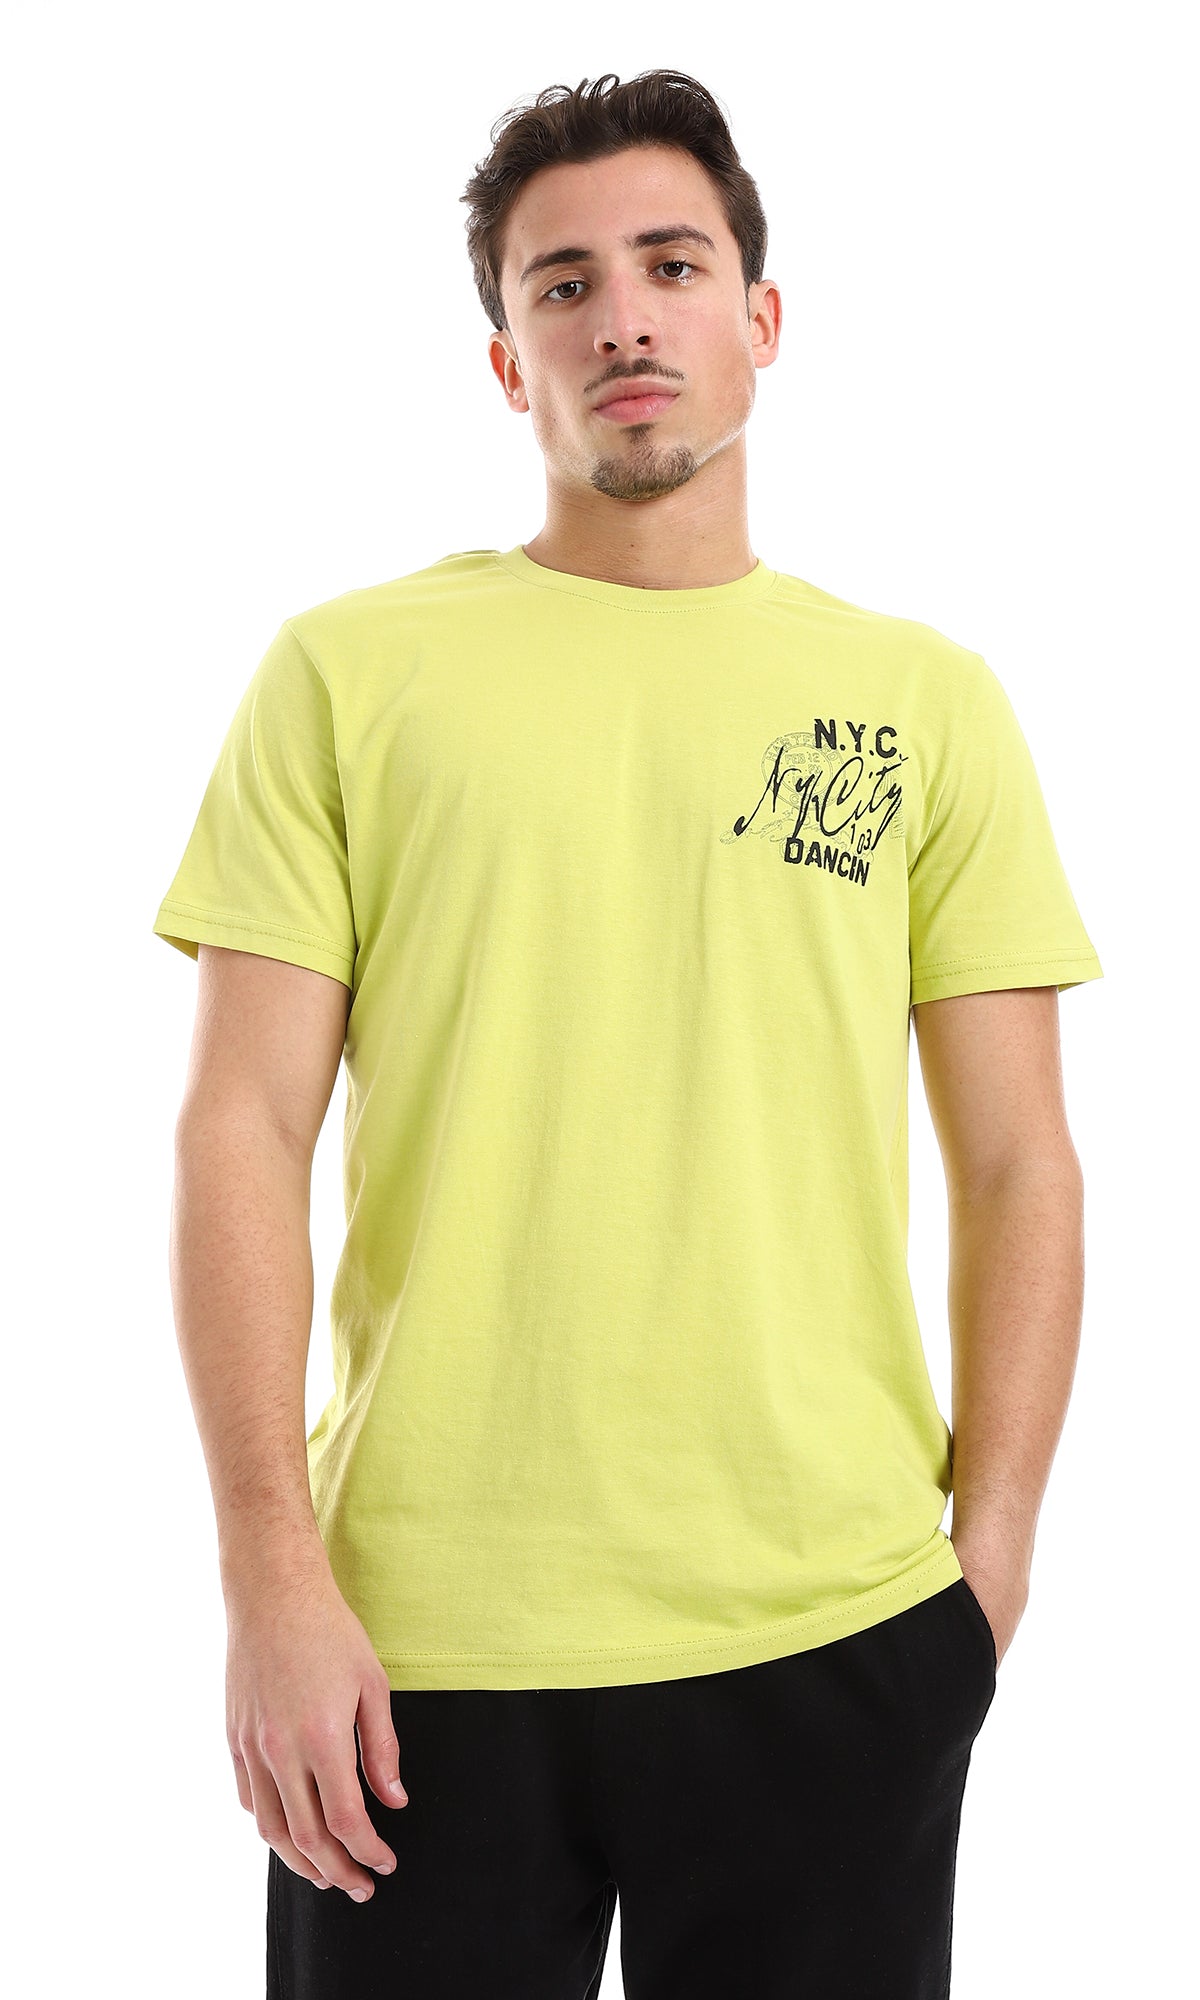 O164610 Back & Chest Printed Tee - Pistachio & Black